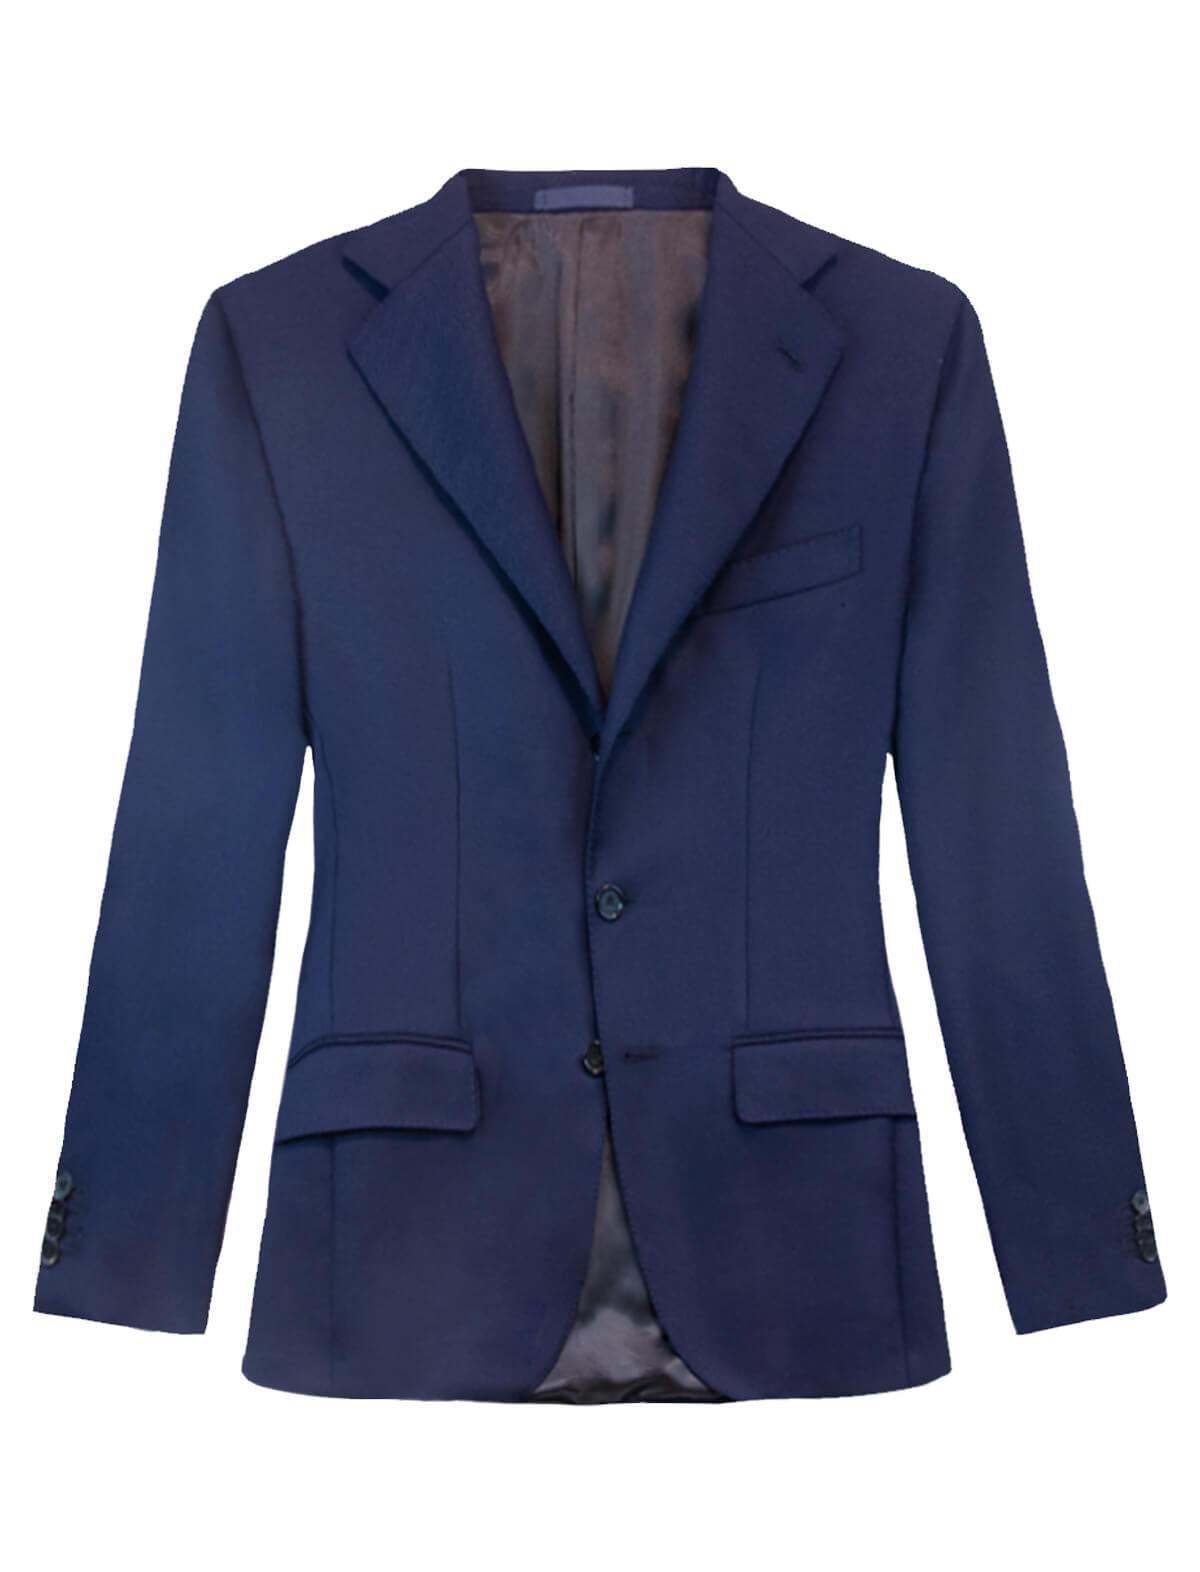 CARUSO Single-Breasted Twill Wool Blazer in Navy | CLOSET Singapore